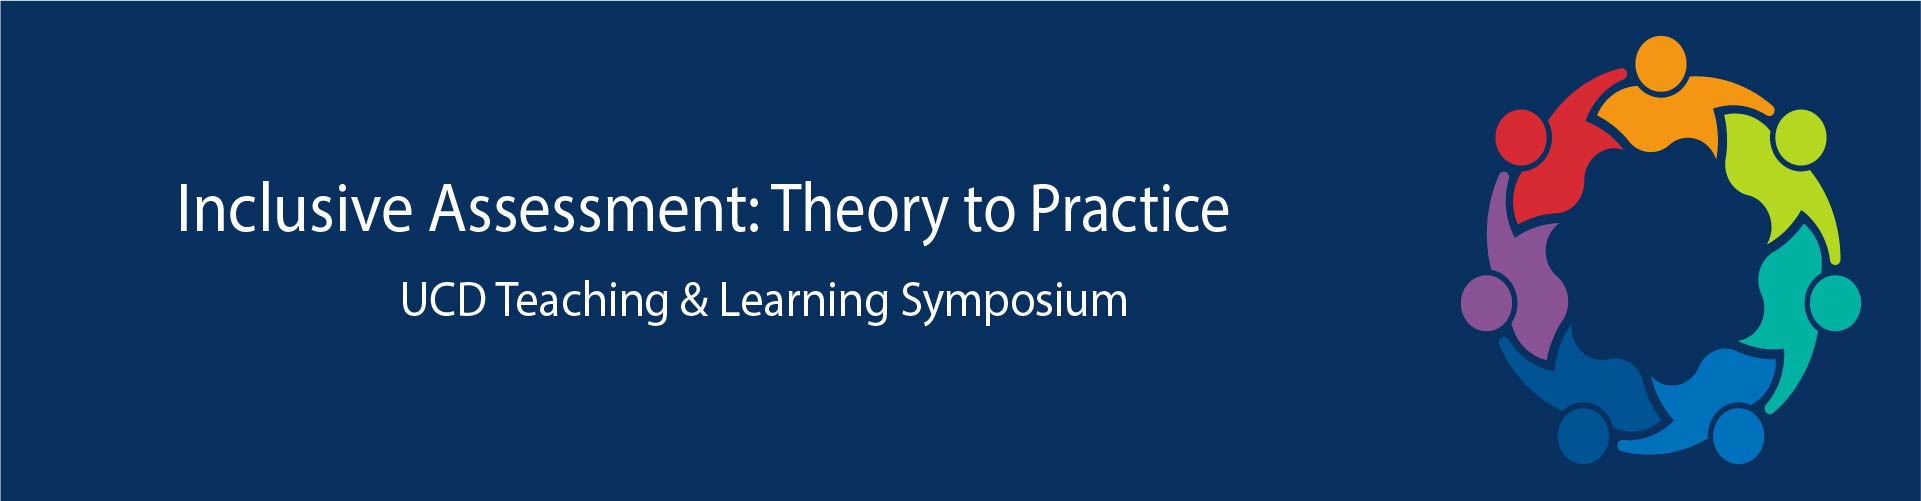 UCD Teaching & Learning Symposium 2023 - Inclusive Assessment: Theory to Practice